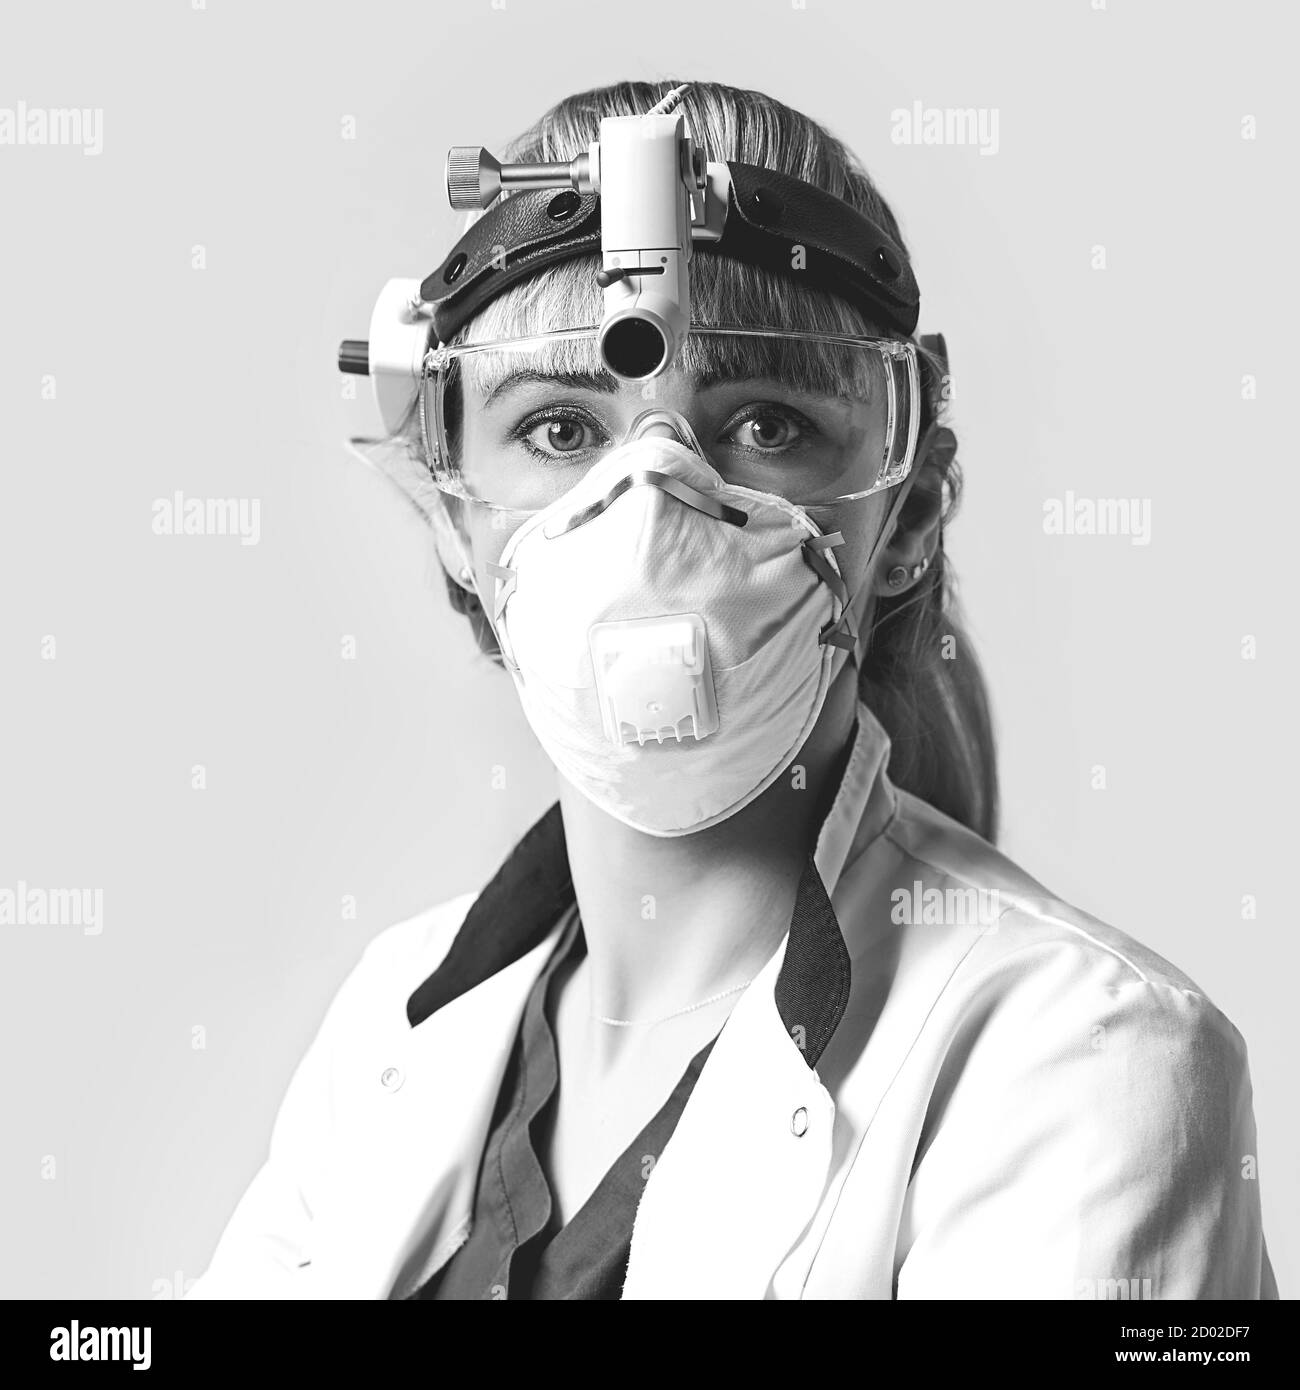 Confident ENT doctor wearing surgical headlight head light and protective glasses. Portrait of female otolaryngologist or head and neck surgeon on Stock Photo